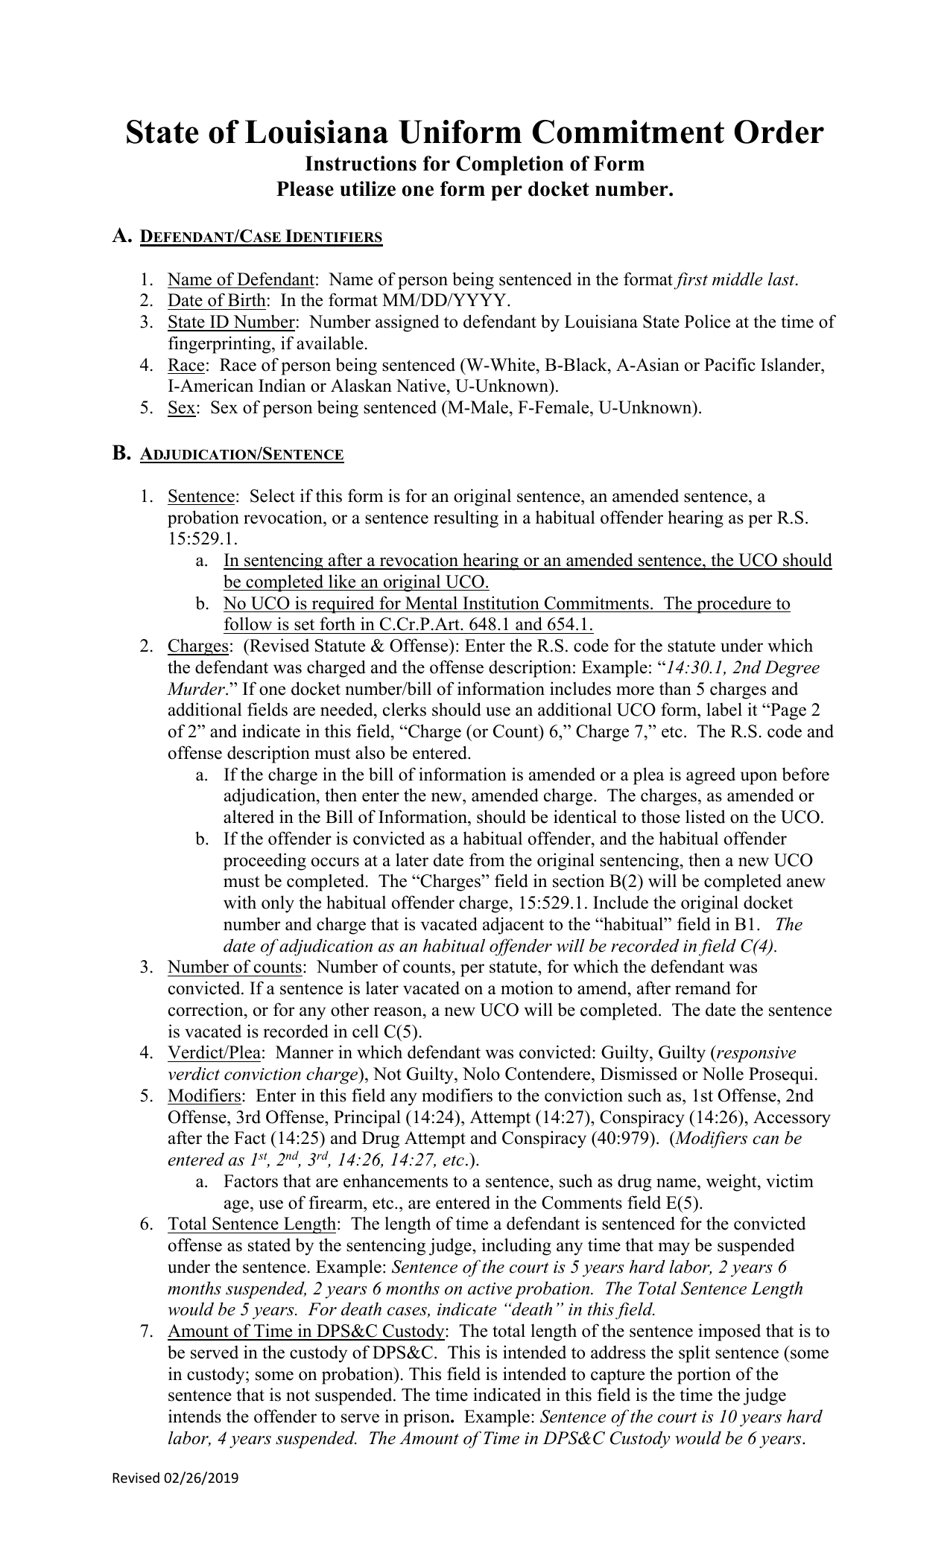 Instructions for State of Louisiana Uniform Commitment Order - Louisiana, Page 1